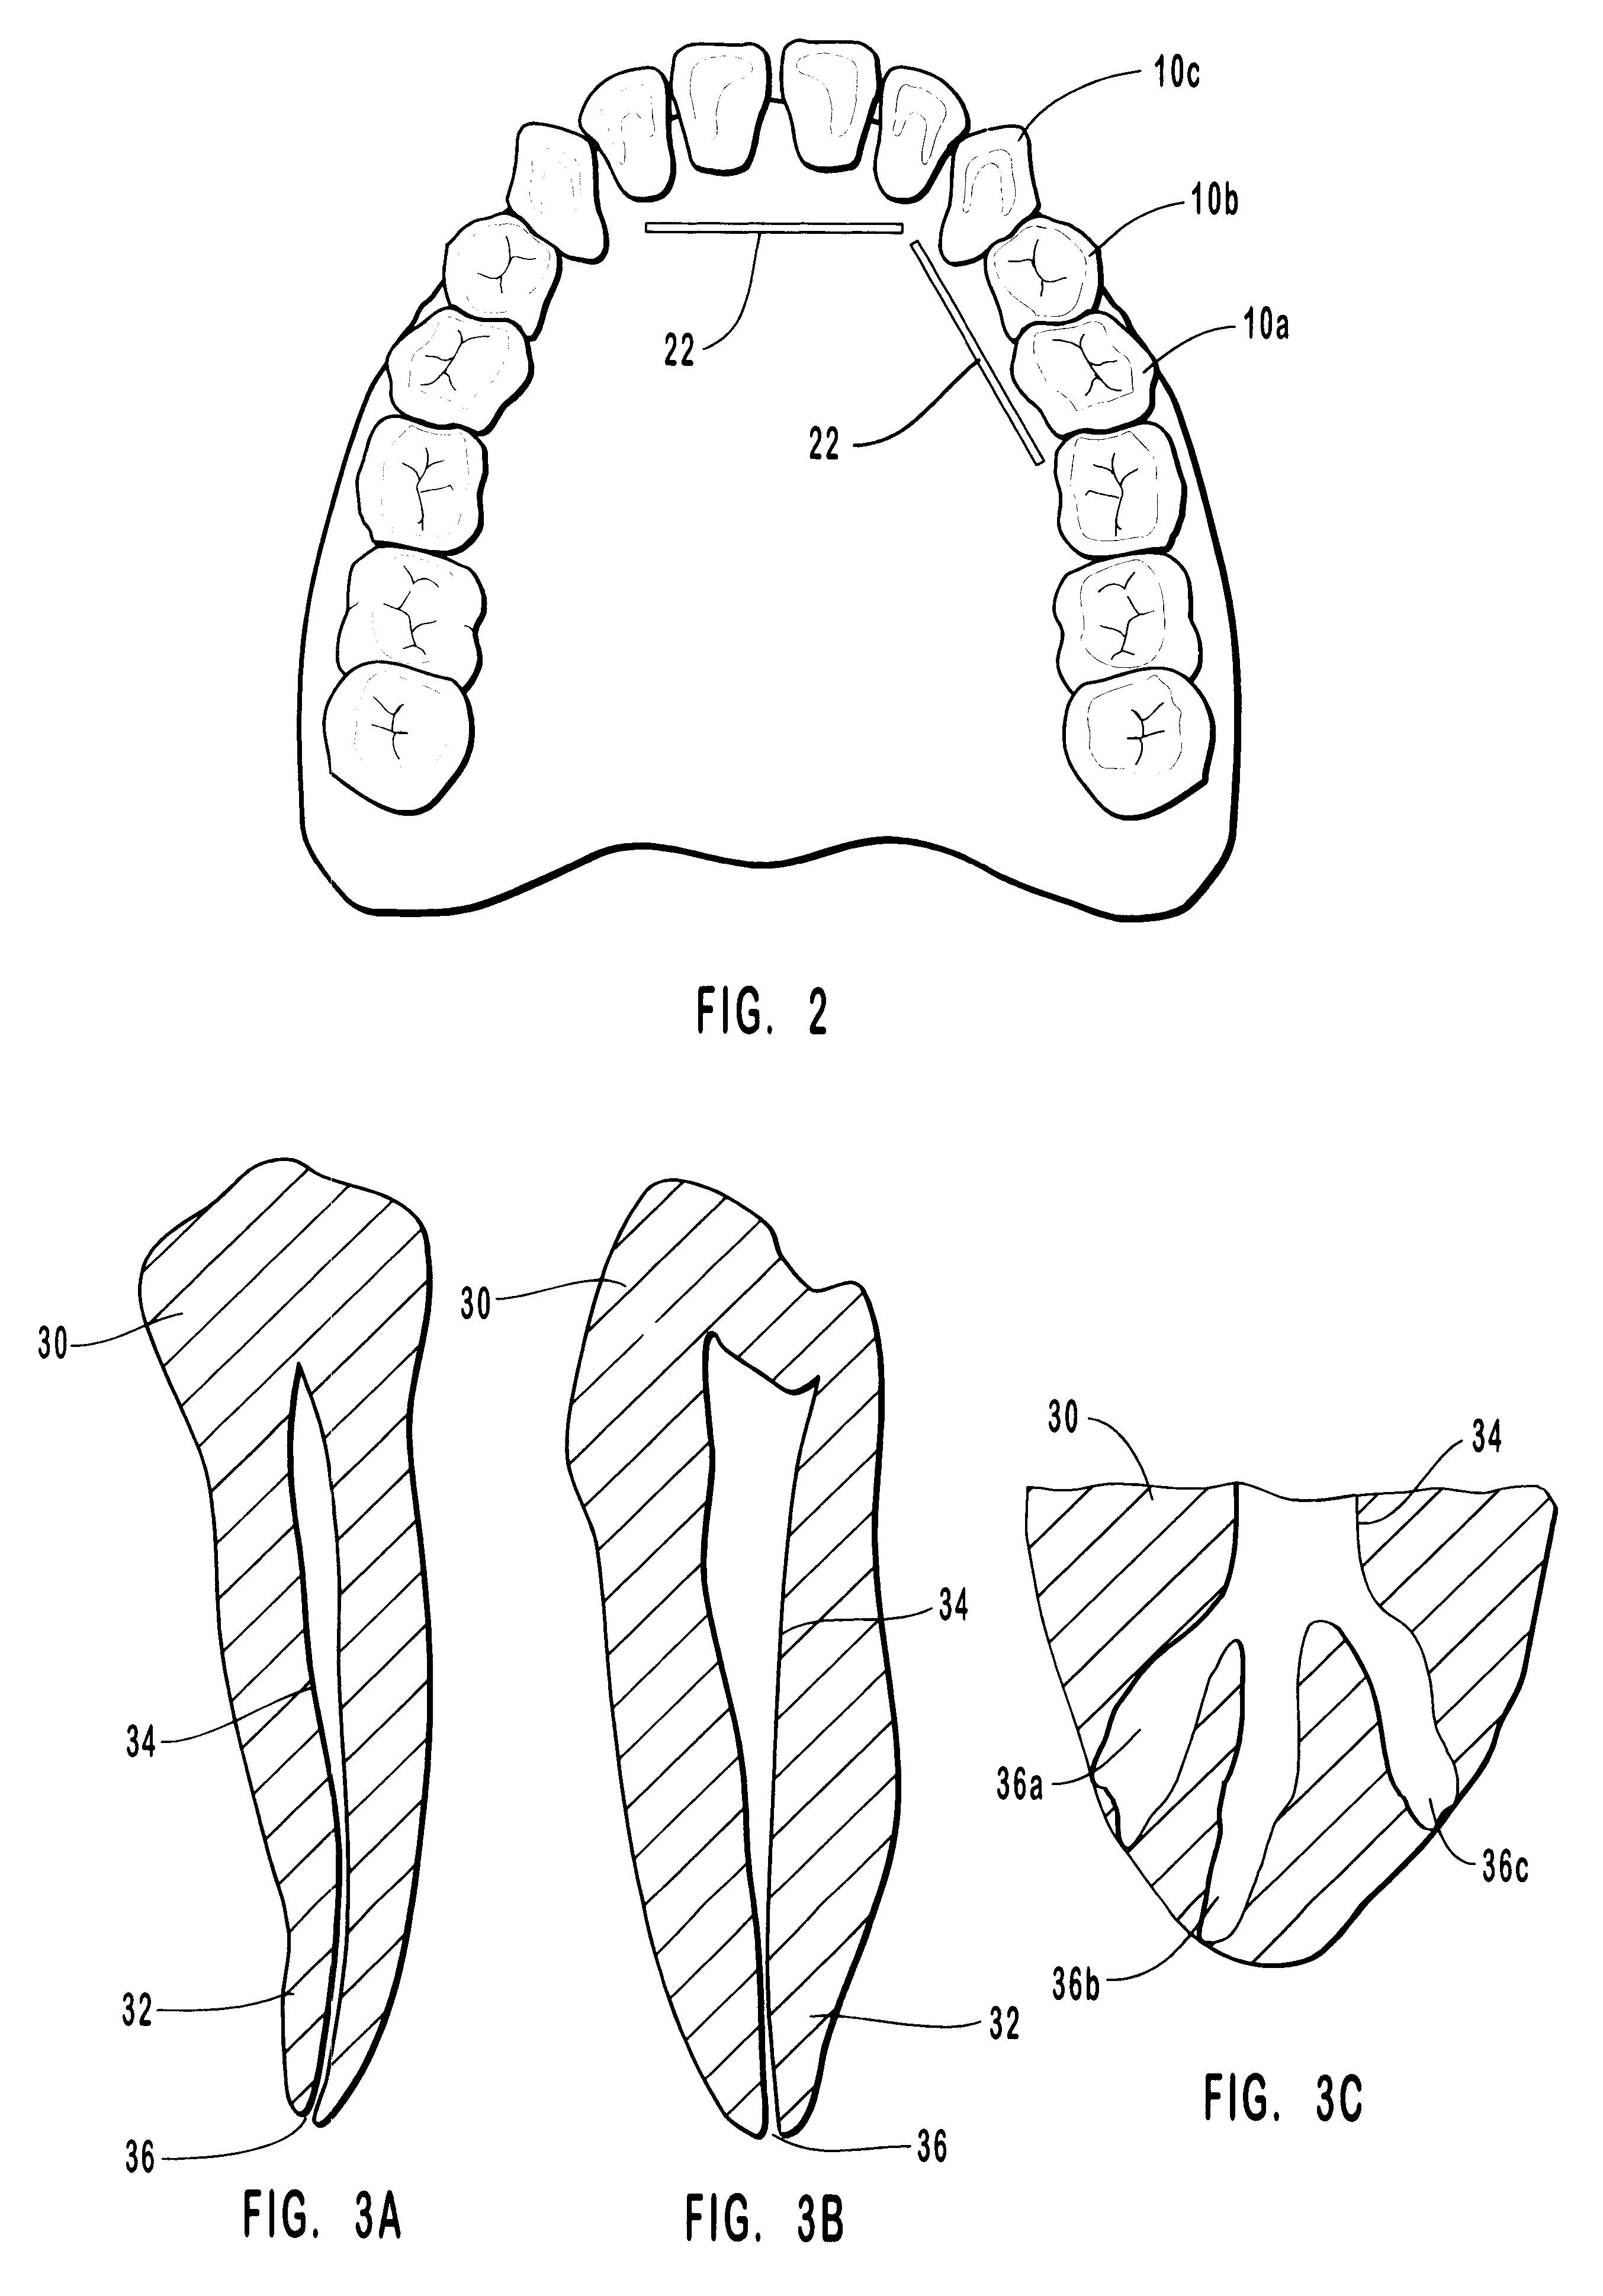 Endodontic systems and methods for the anatomical, sectional and progressive corono-apical preparation of root canals with instruments utilizing stops